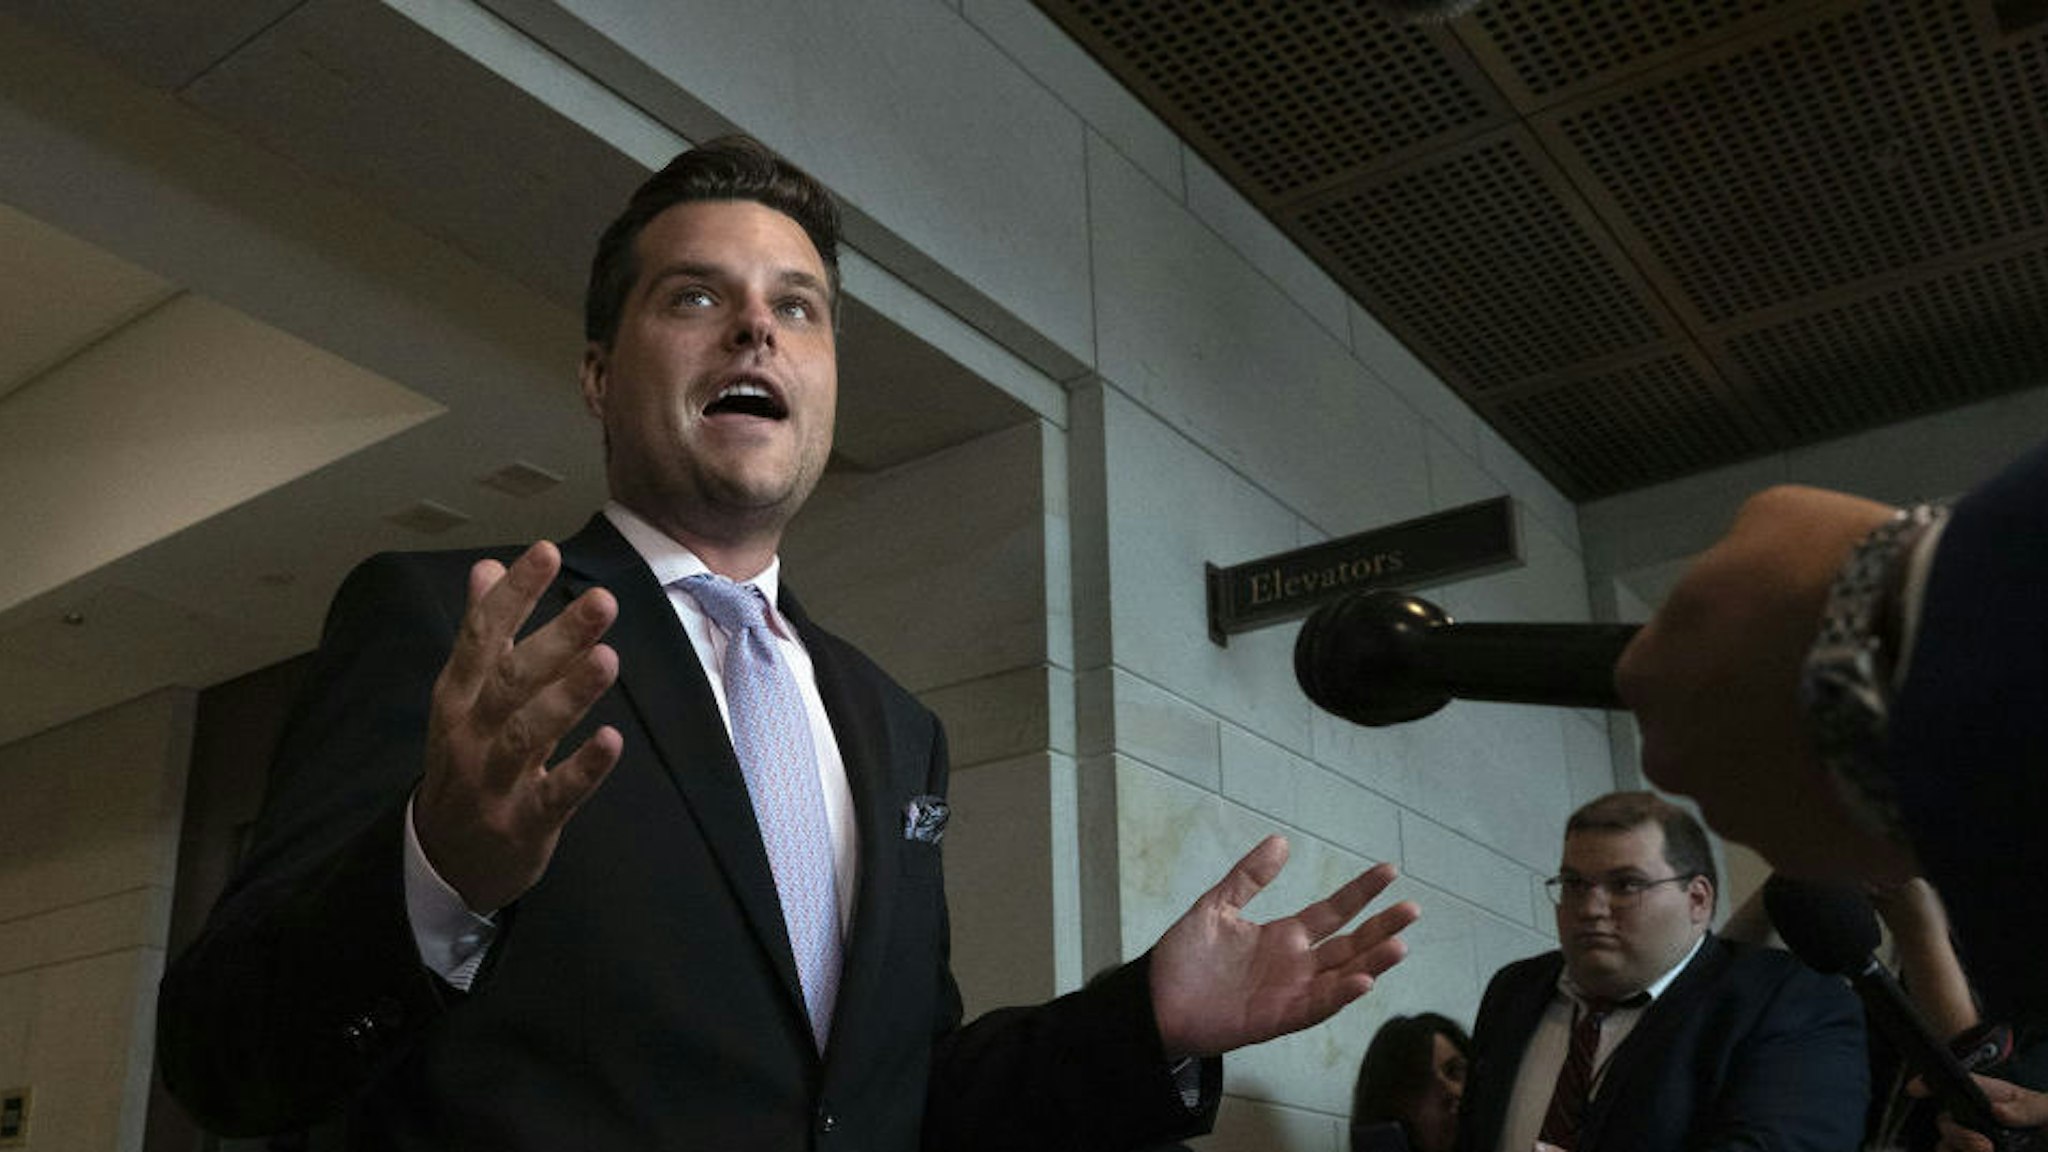 Representative Matt Gaetz, a Republican from Florida, speaks to members of the media after leaving a closed-door testimony with Fiona Hill, former National Security Council Russia expert, on Capitol Hill in Washington, D.C., U.S., on Monday, Oct. 14, 2019. Hill's testimony kicks off what could be a pivotal week in the probe, with at least three other witnesses scheduled to appear before the Intelligence, Foreign Affairs and Oversight and Reform committees. Photographer: Stefani Reynolds/Bloomberg